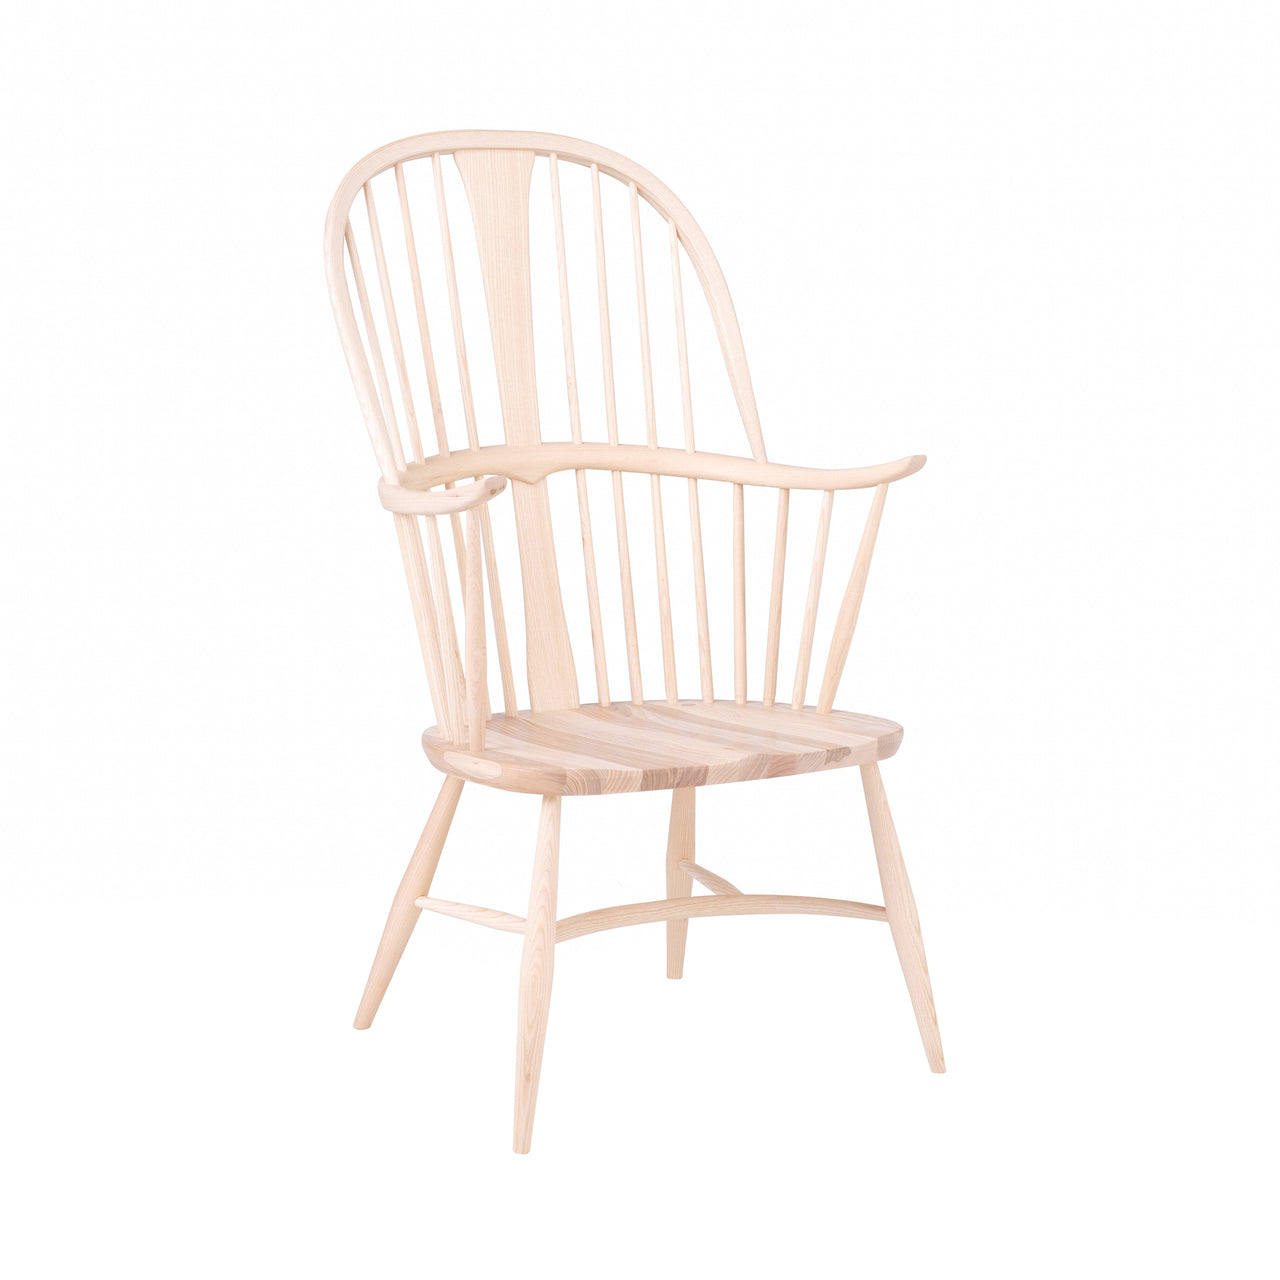 Originals Chairmakers Chair: Natural Ash